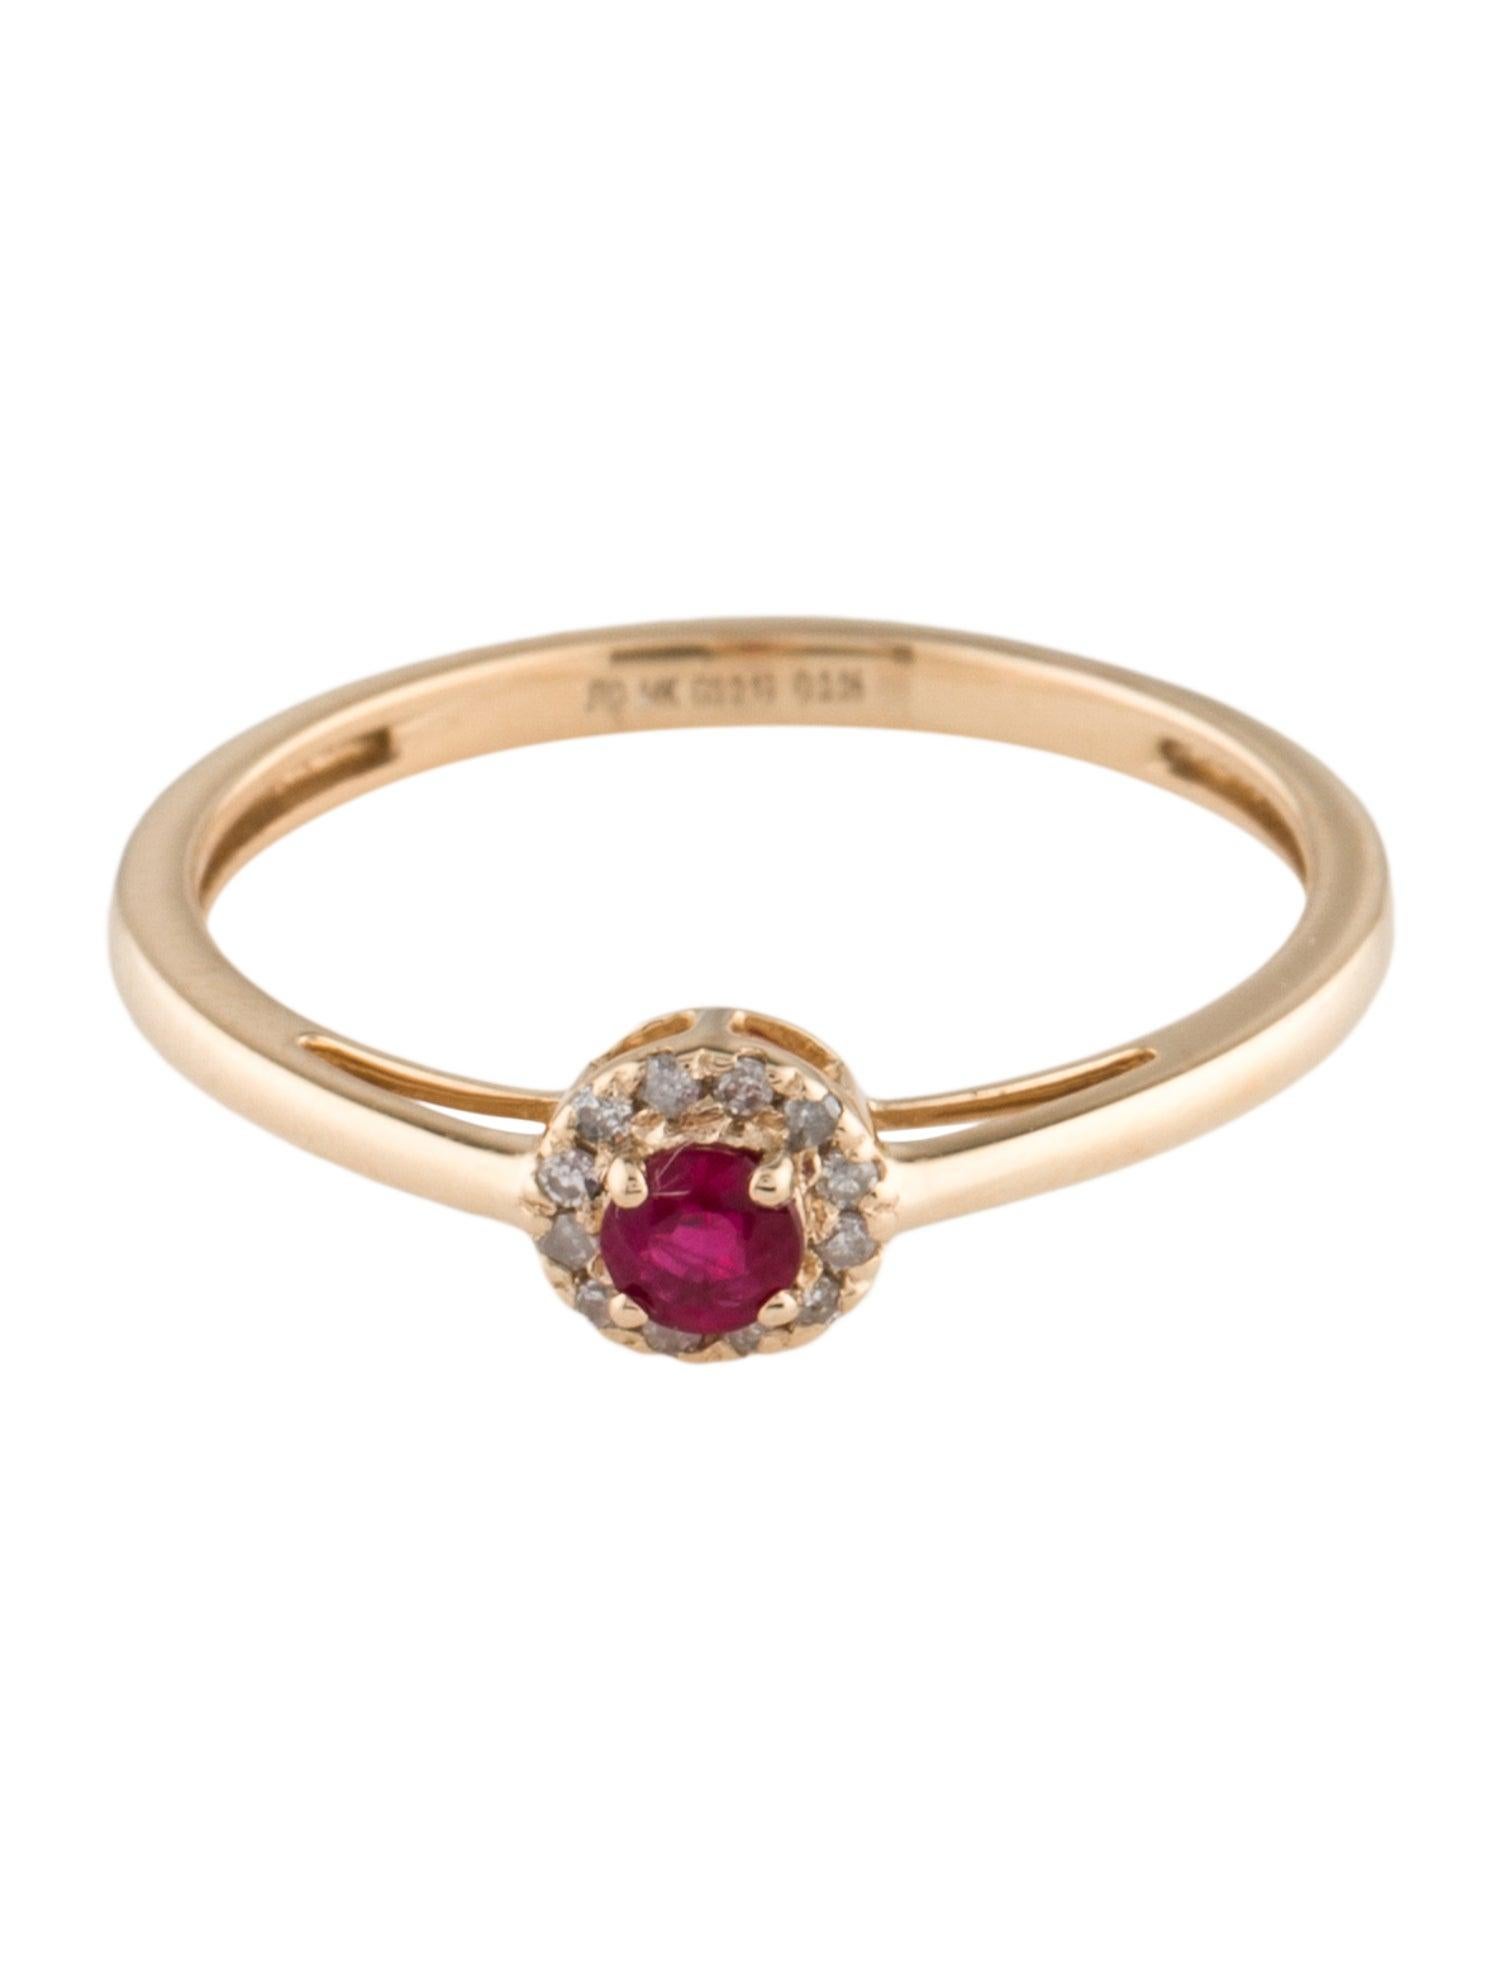 Brilliant Cut 14K Yellow Gold Thin Cocktail Ring with 0.14ct Ruby and 0.06ct Diamond Accents For Sale